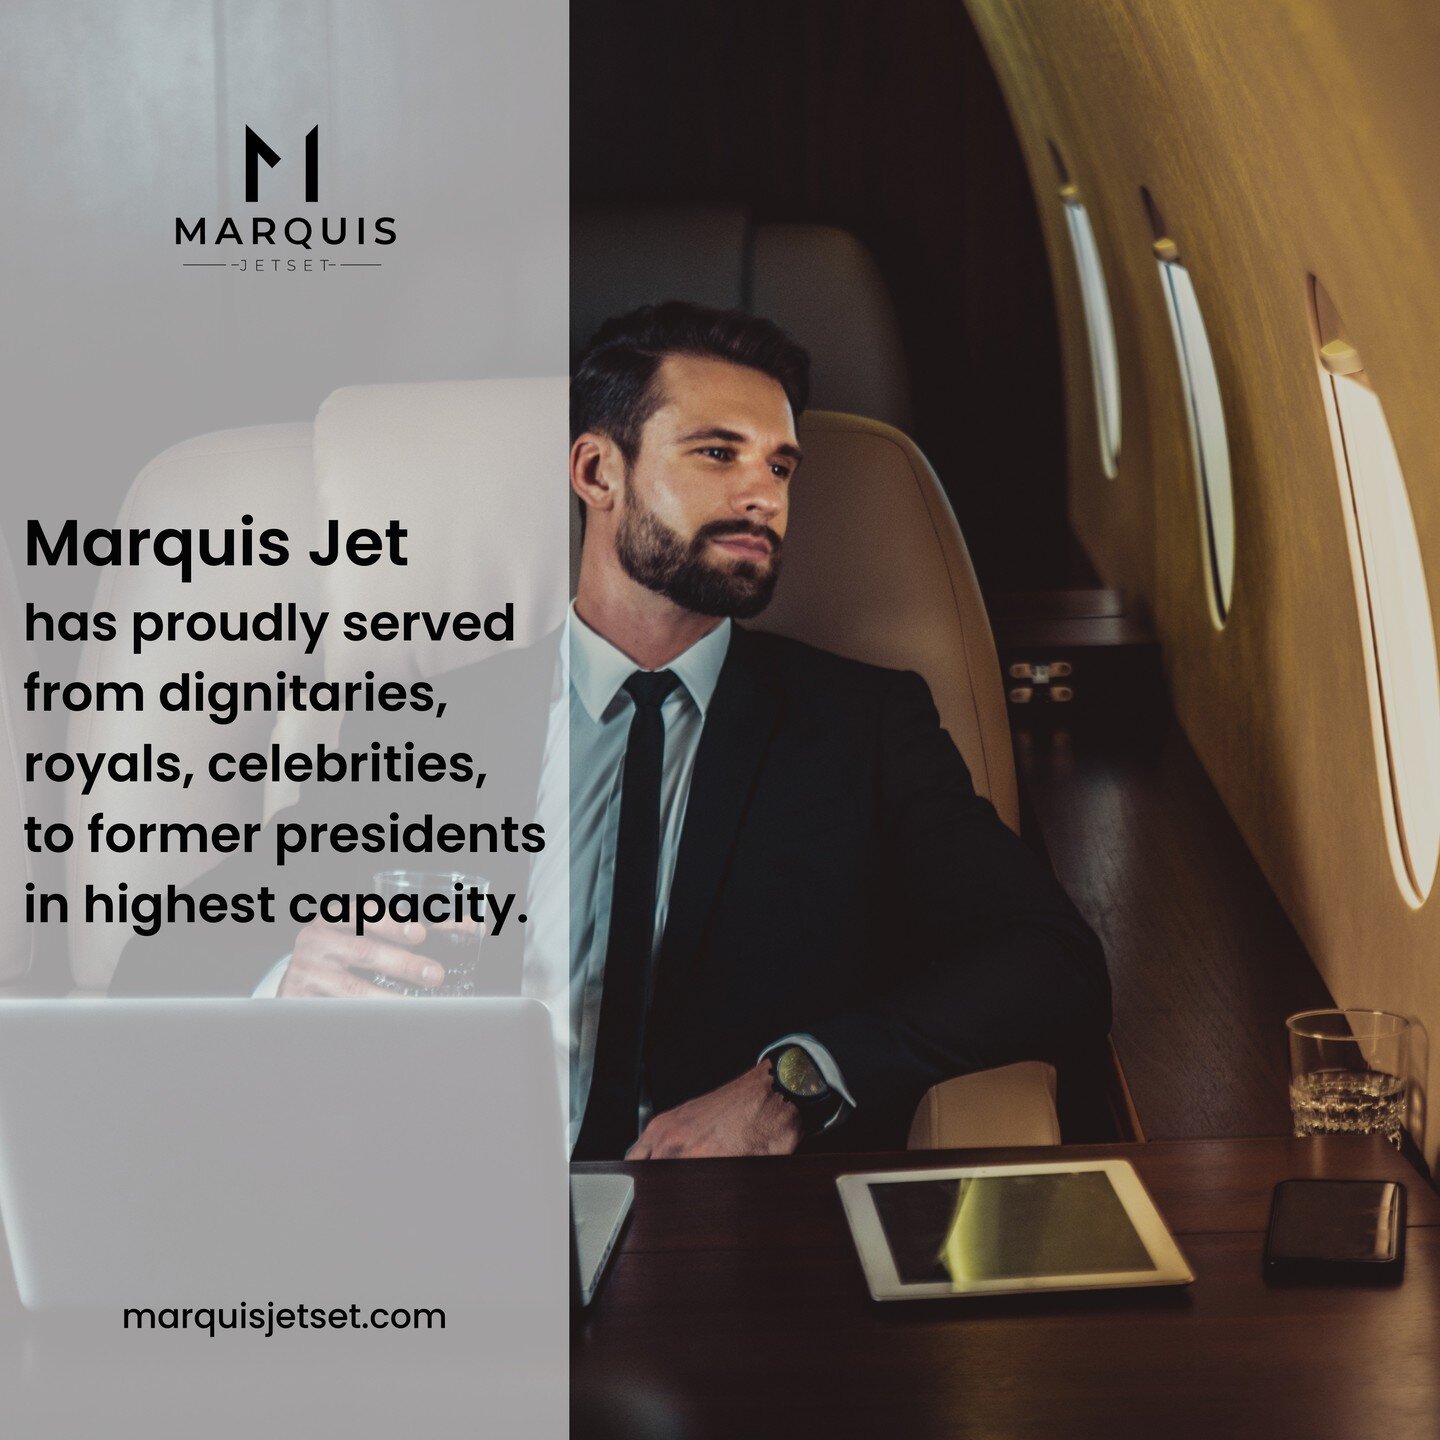 Our customers are our Strength #FLYMARQUIS
Visit: http://marquisjetset.com
#MarquisJetset 
#Trelvel 
#PrivateJet 
#BeautifullDestinations 
#Jet
#privatejet
#privatejets
#privatejetcharter
#privatejetlife
#privatejetlifestyle
#privatejettravelprivatej